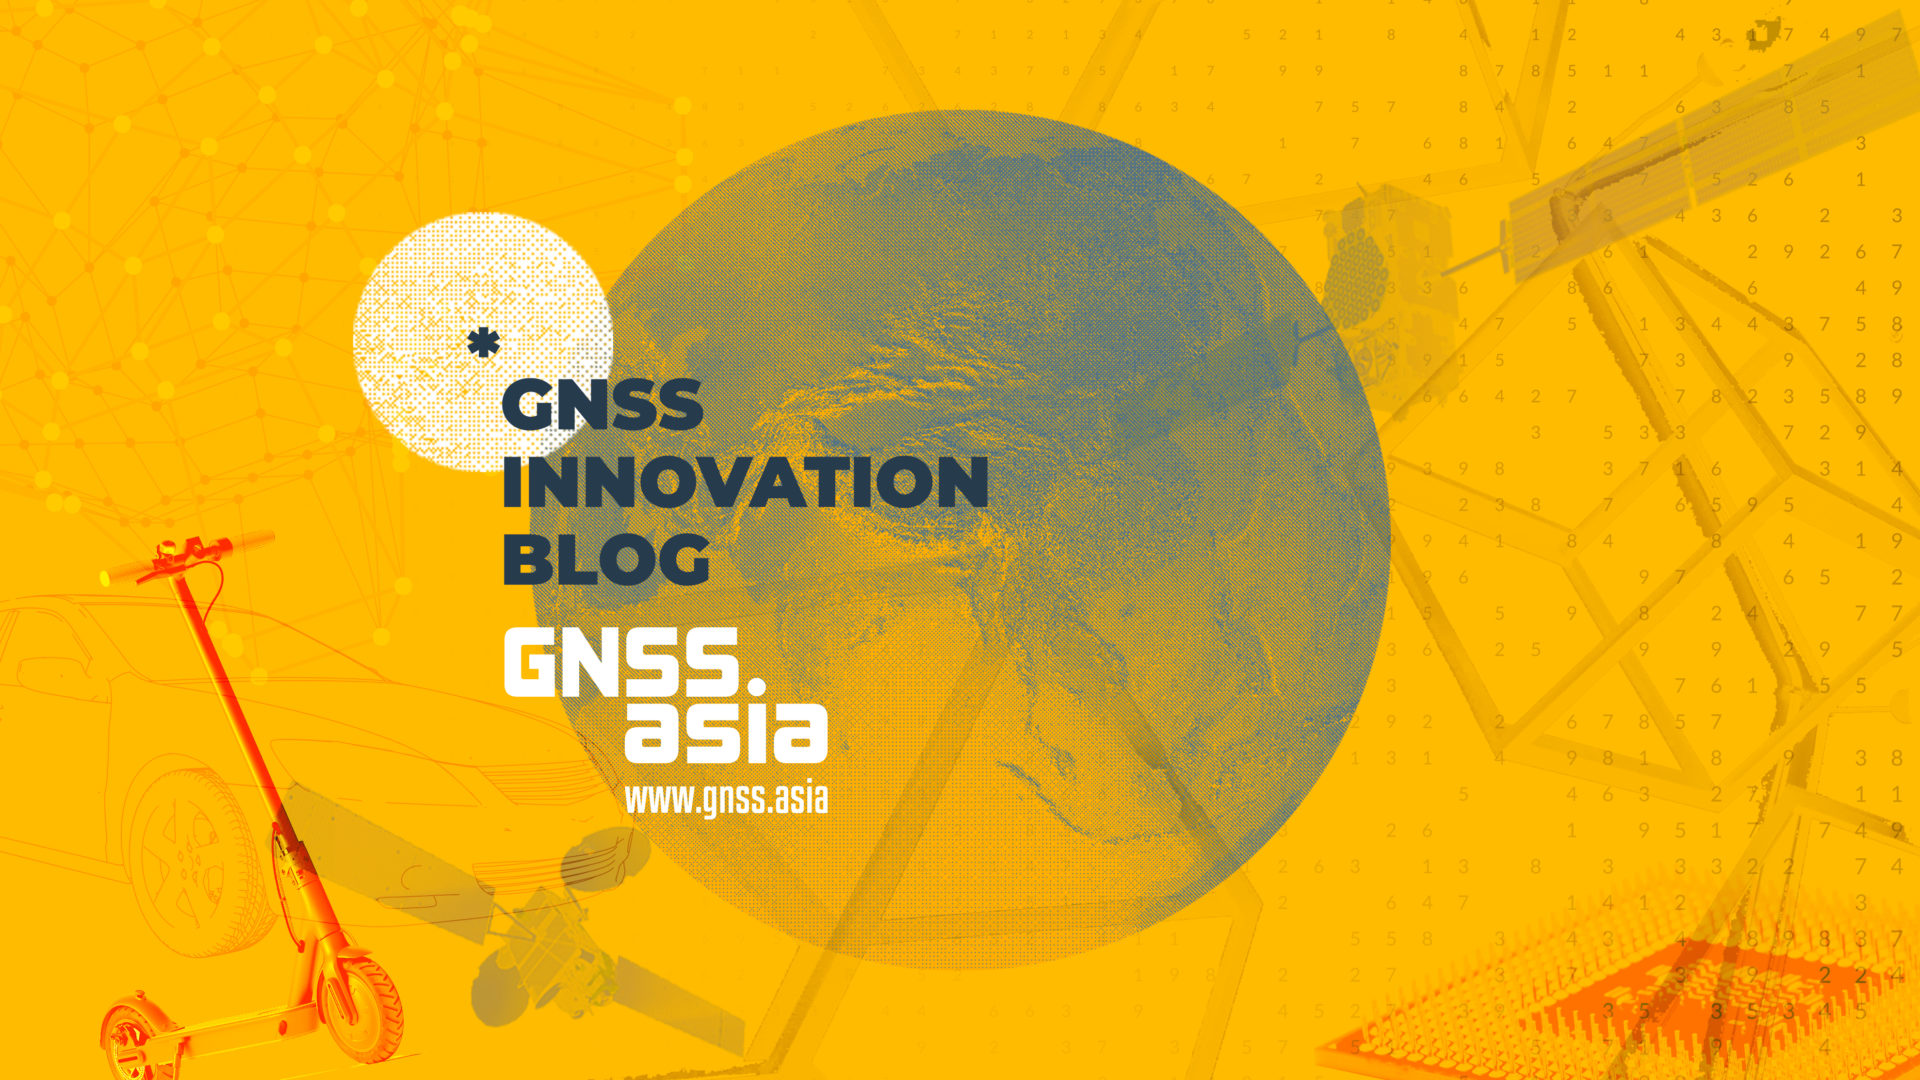 GNSS.asia innovation blog is now live!